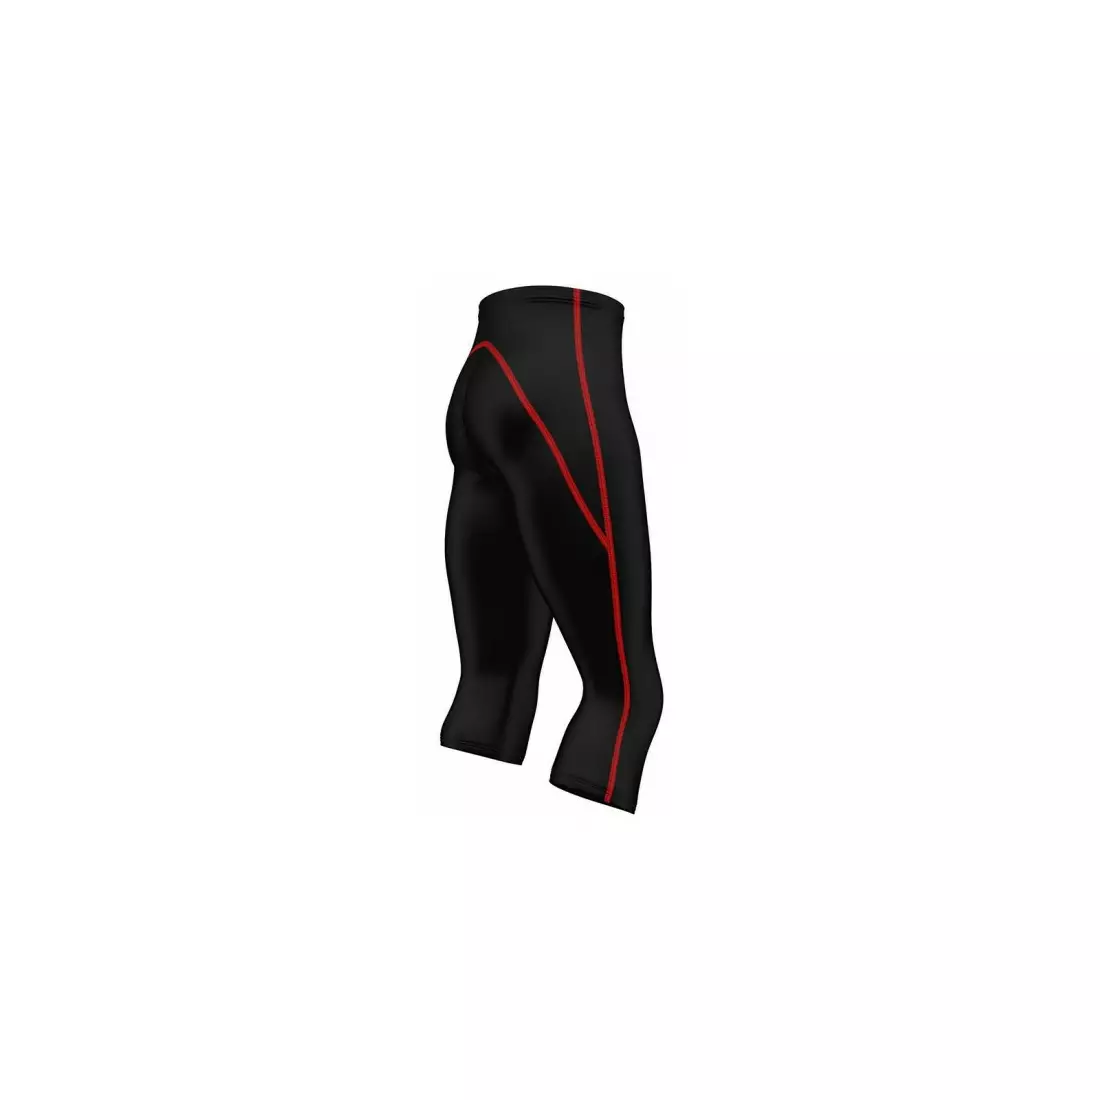 FDX 1600 men's 3/4 cycling shorts, black with red seams